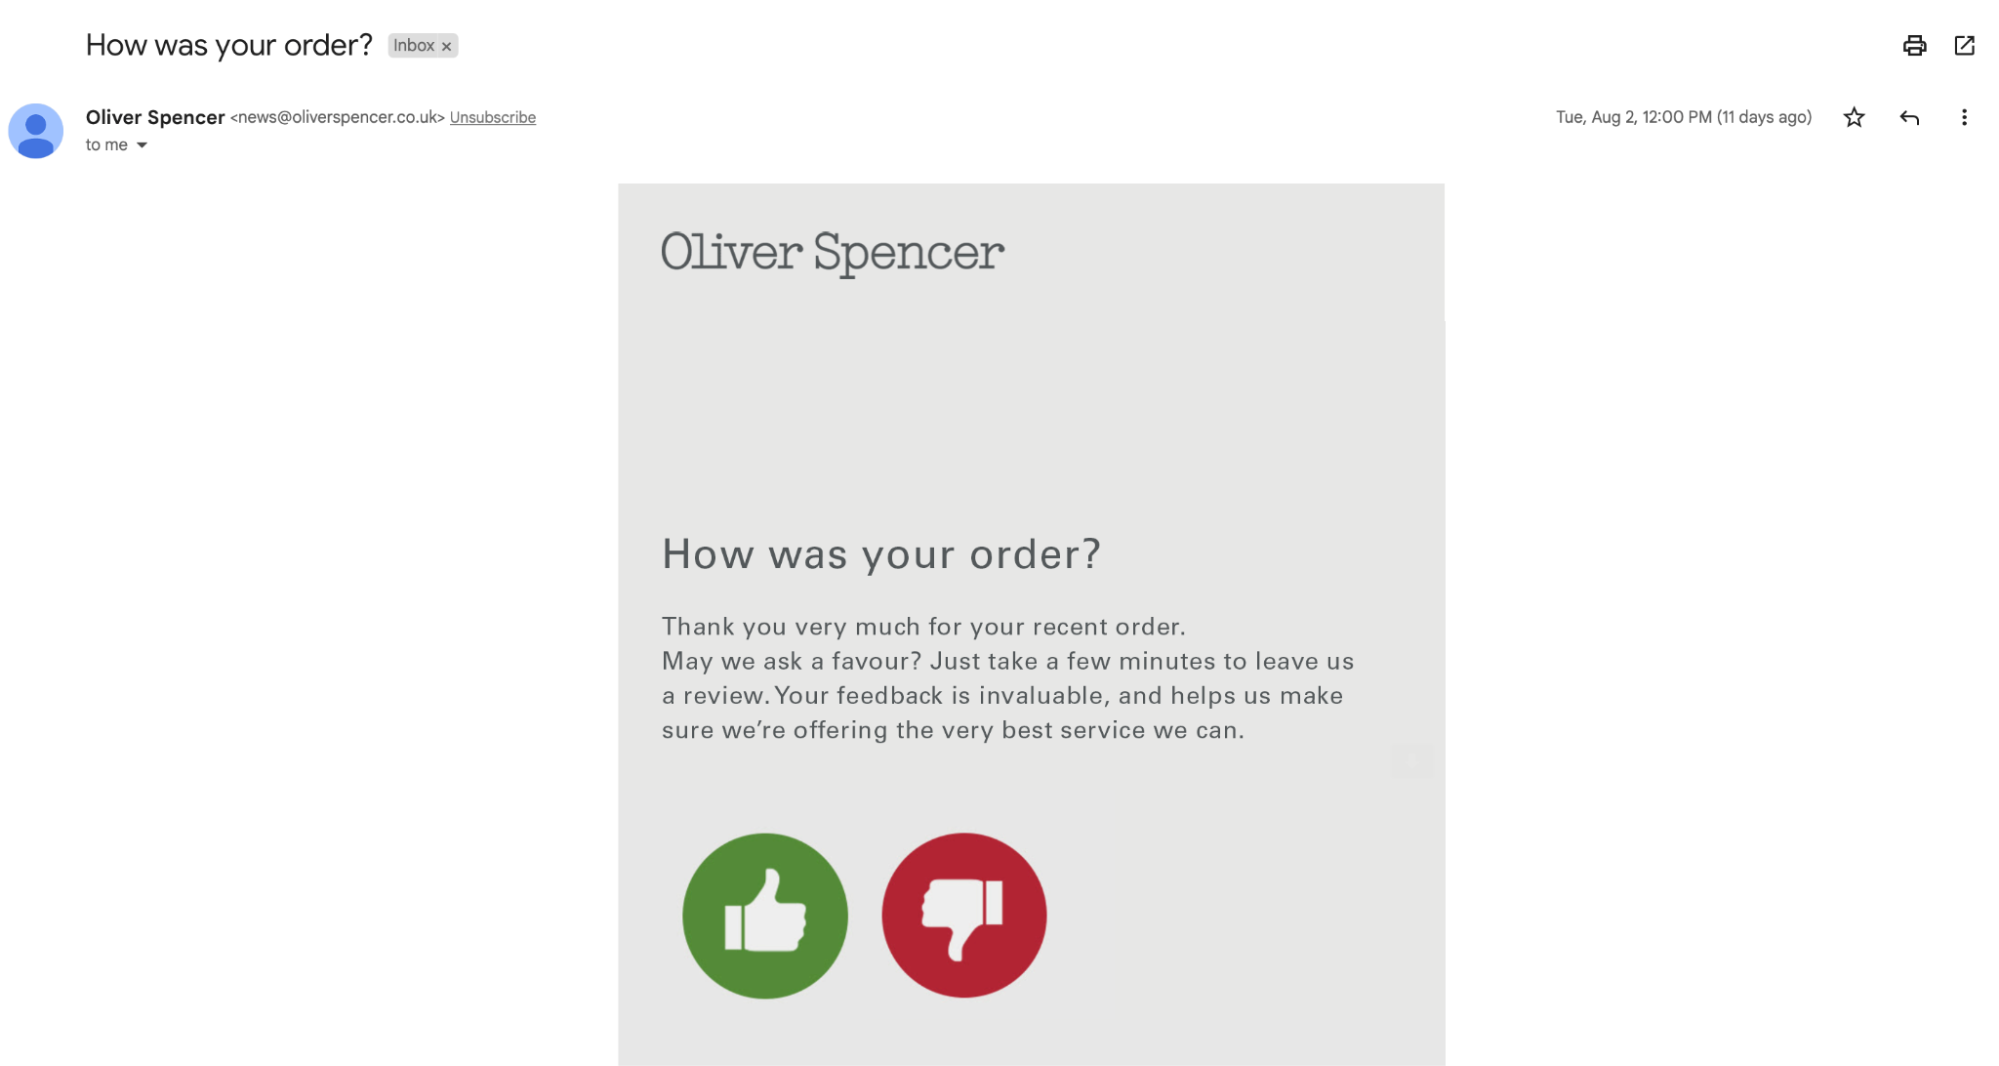 An example of a personalized email from a fashion brand Oliver Spencer